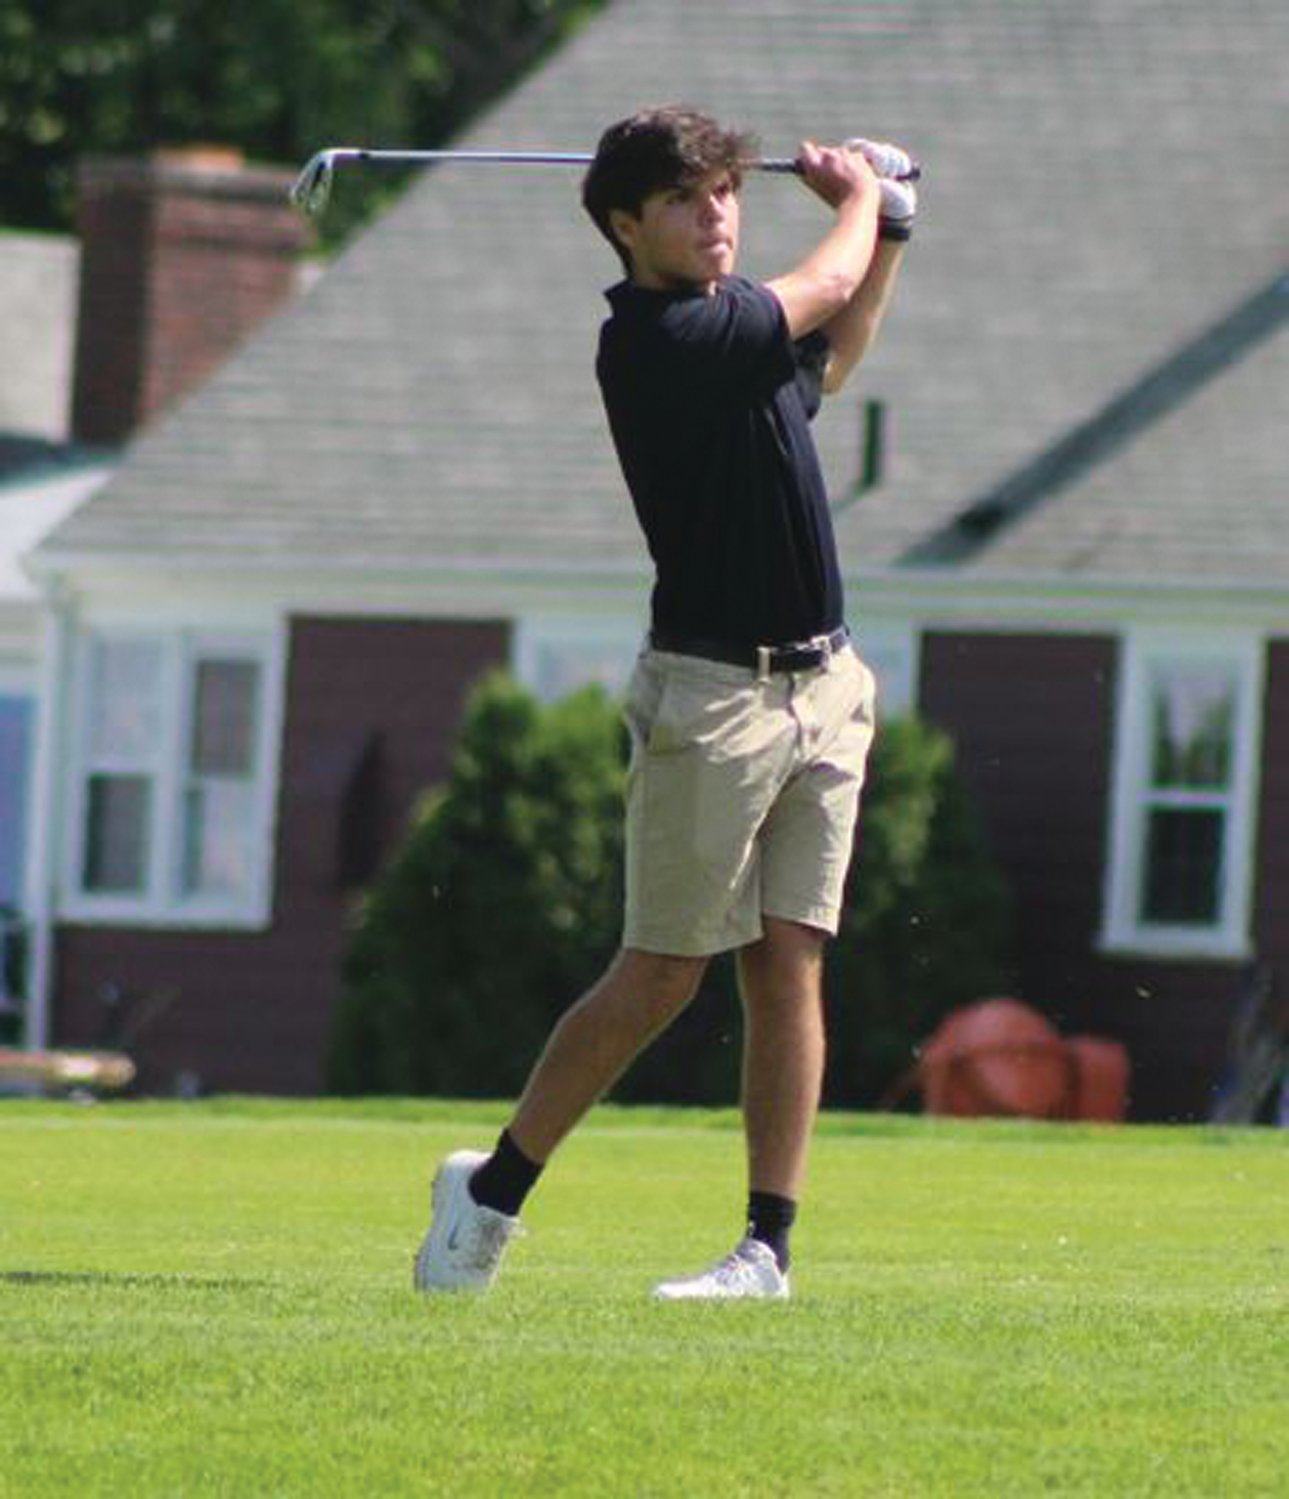 DOWN THE FAIRWAY: Cranston West’s Peter Vachon takes a swing on Monday.